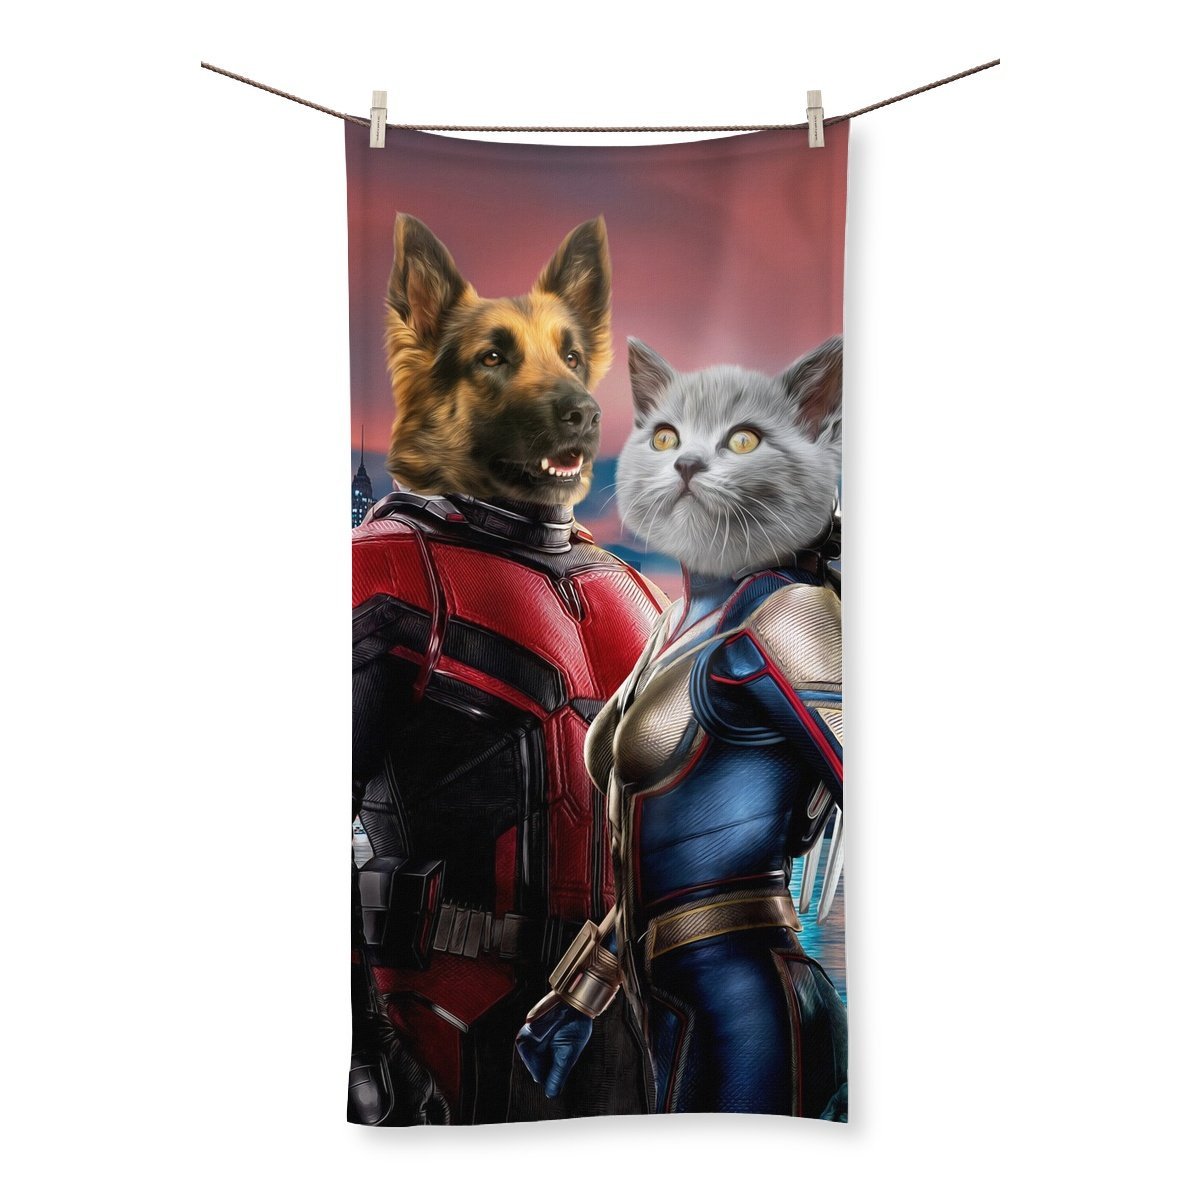 The Antan & The Wasp: Custom Pet Towel - Paw & Glory - #pet portraits# - #dog portraits# - #pet portraits uk#Paw & Glory, paw and glory, pet portrait admiral, funny dog paintings, pictures for pets, painting pets, dog astronaut photo, pet portrait admiral, pet portraits,pet art Towel